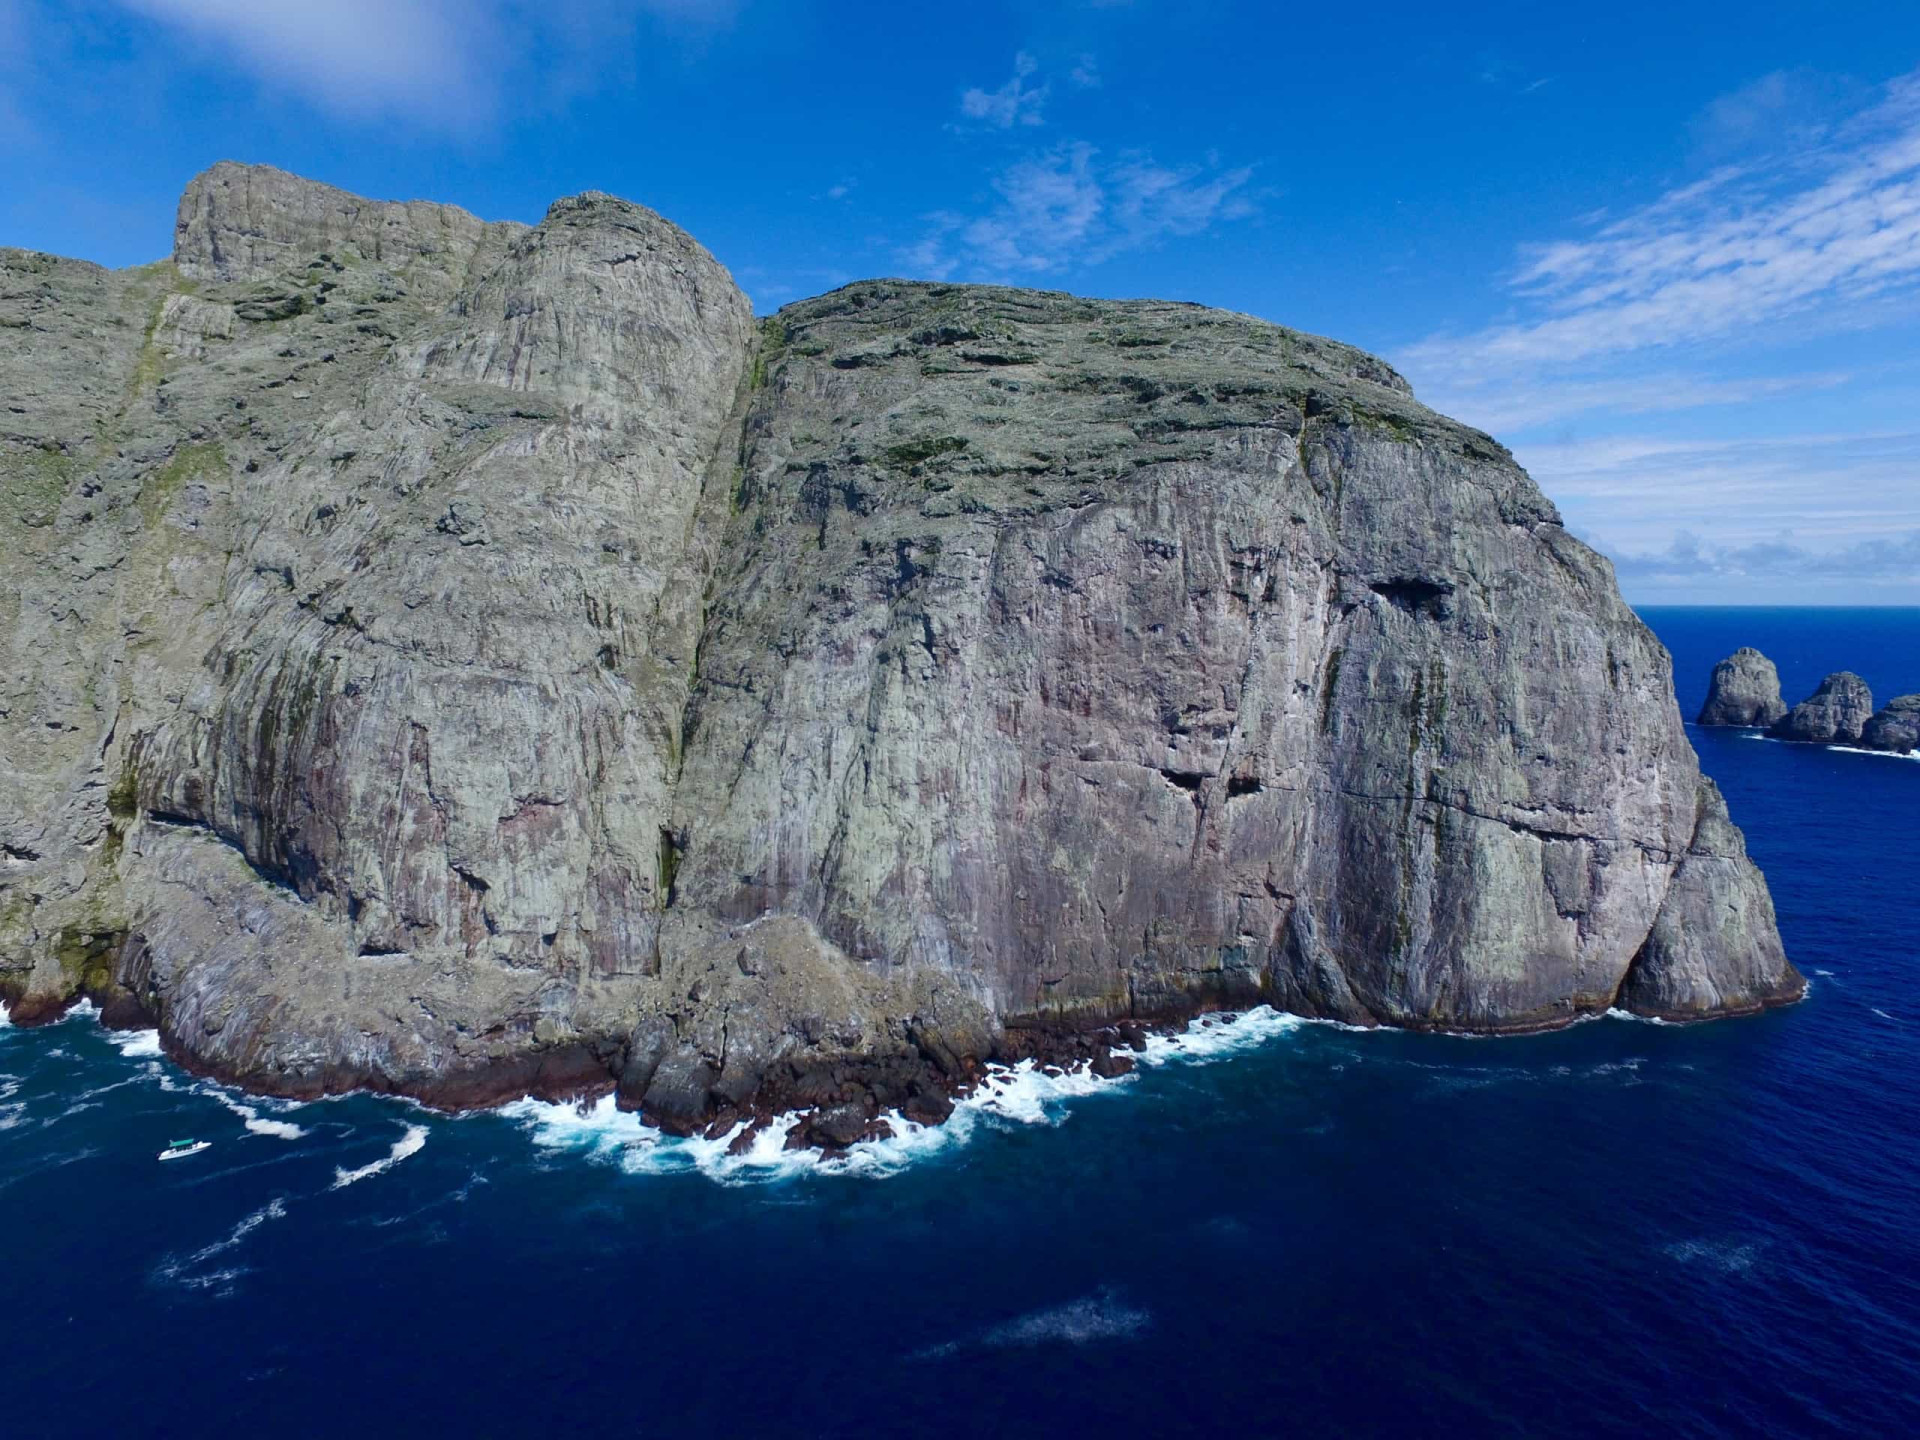 Location: Cauca Department<br>Criteria: Natural<br>Year established: 2006<br>Description: Located in the East Pacific Ocean, the small island of Malpelo is home to a unique shark population. An oceanic island, Malpelo has never been connected with any other islands or the mainland.<p><a href="https://www.msn.com/en-us/community/channel/vid-7xx8mnucu55yw63we9va2gwr7uihbxwc68fxqp25x6tg4ftibpra?cvid=94631541bc0f4f89bfd59158d696ad7e">Follow us and access great exclusive content every day</a></p>